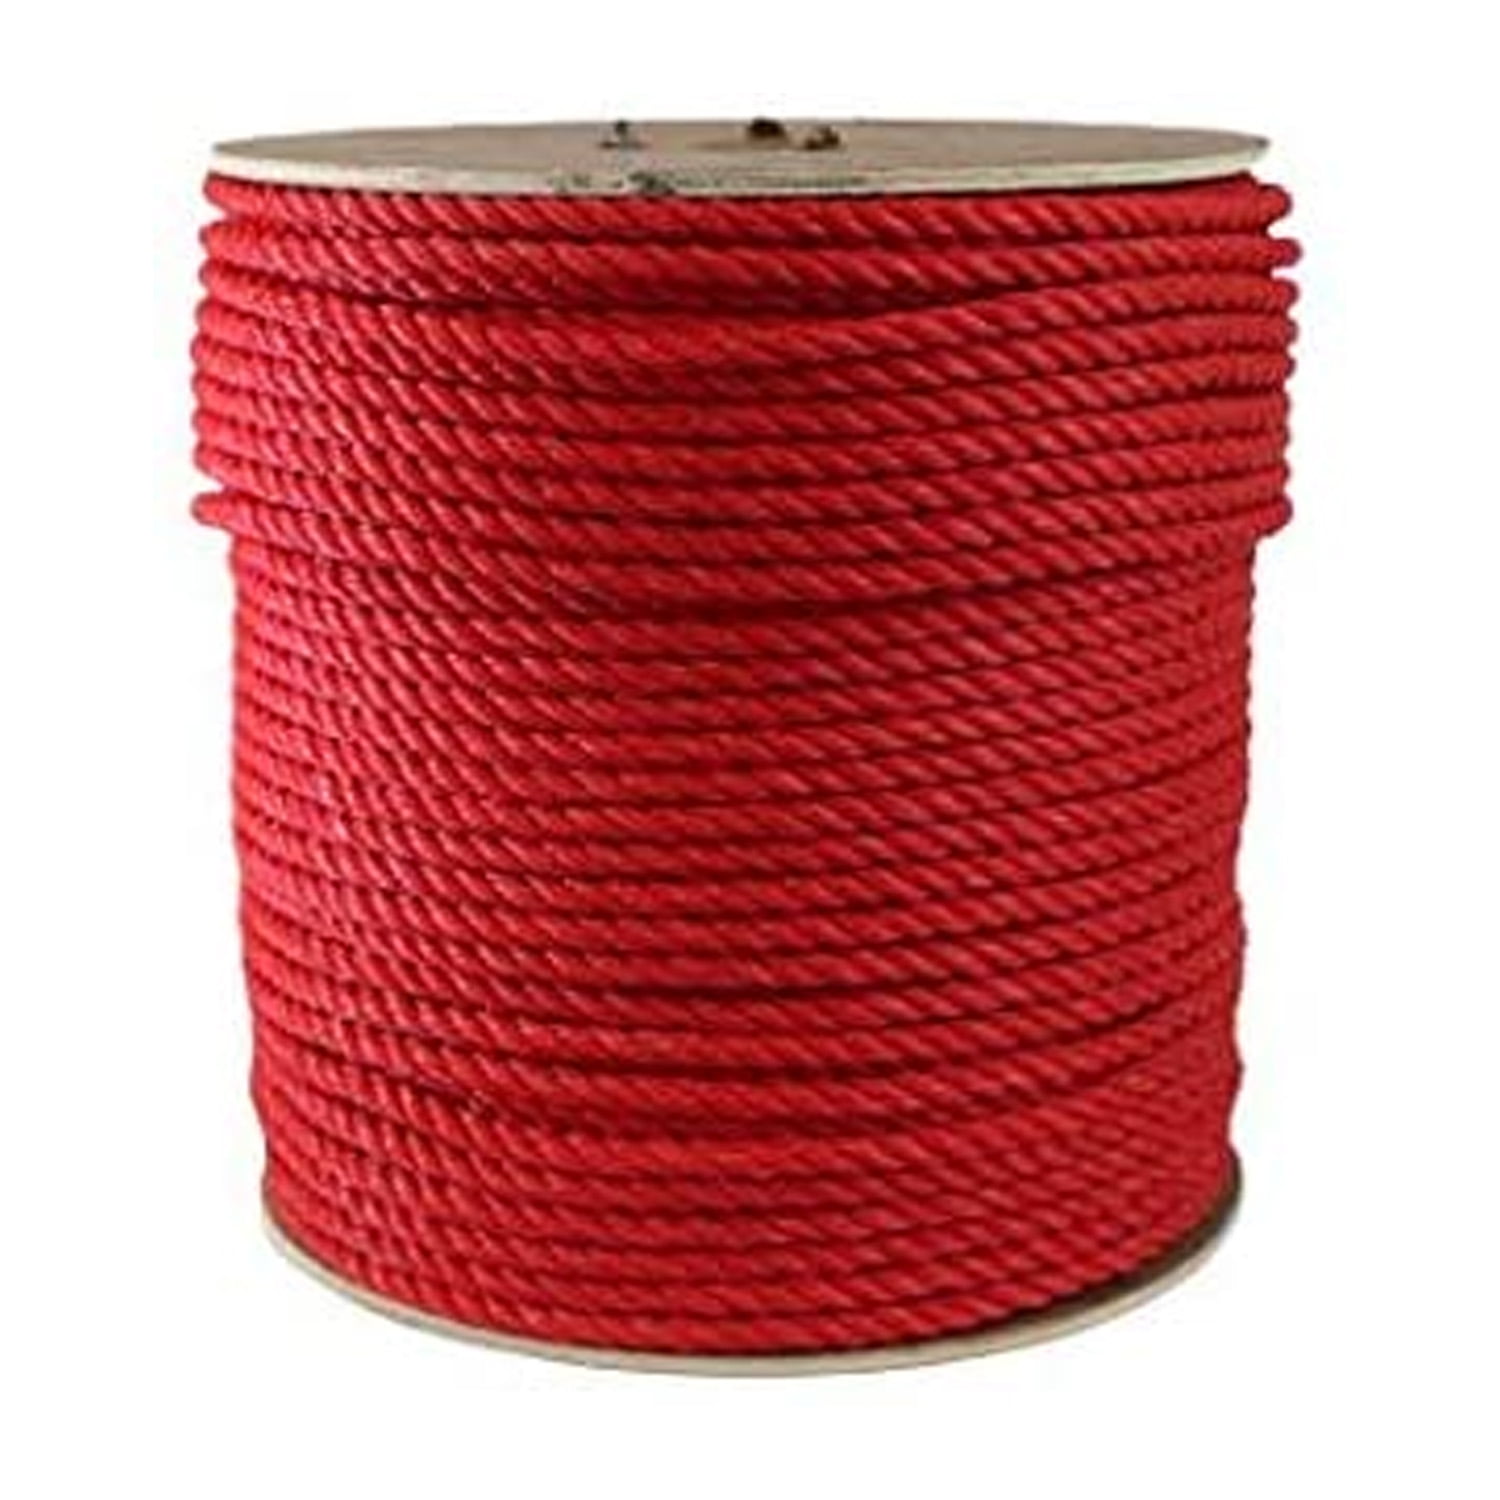 ATERET Twisted 3-Strand Red Polypropylene Rope Monofilament I 5/16 x 600  Feet I 1,125 lbs. Tensile Strength I Lightweight & Heavy-Duty Synthetic  Cord for DIY Projects, Marine, Commercial Use 